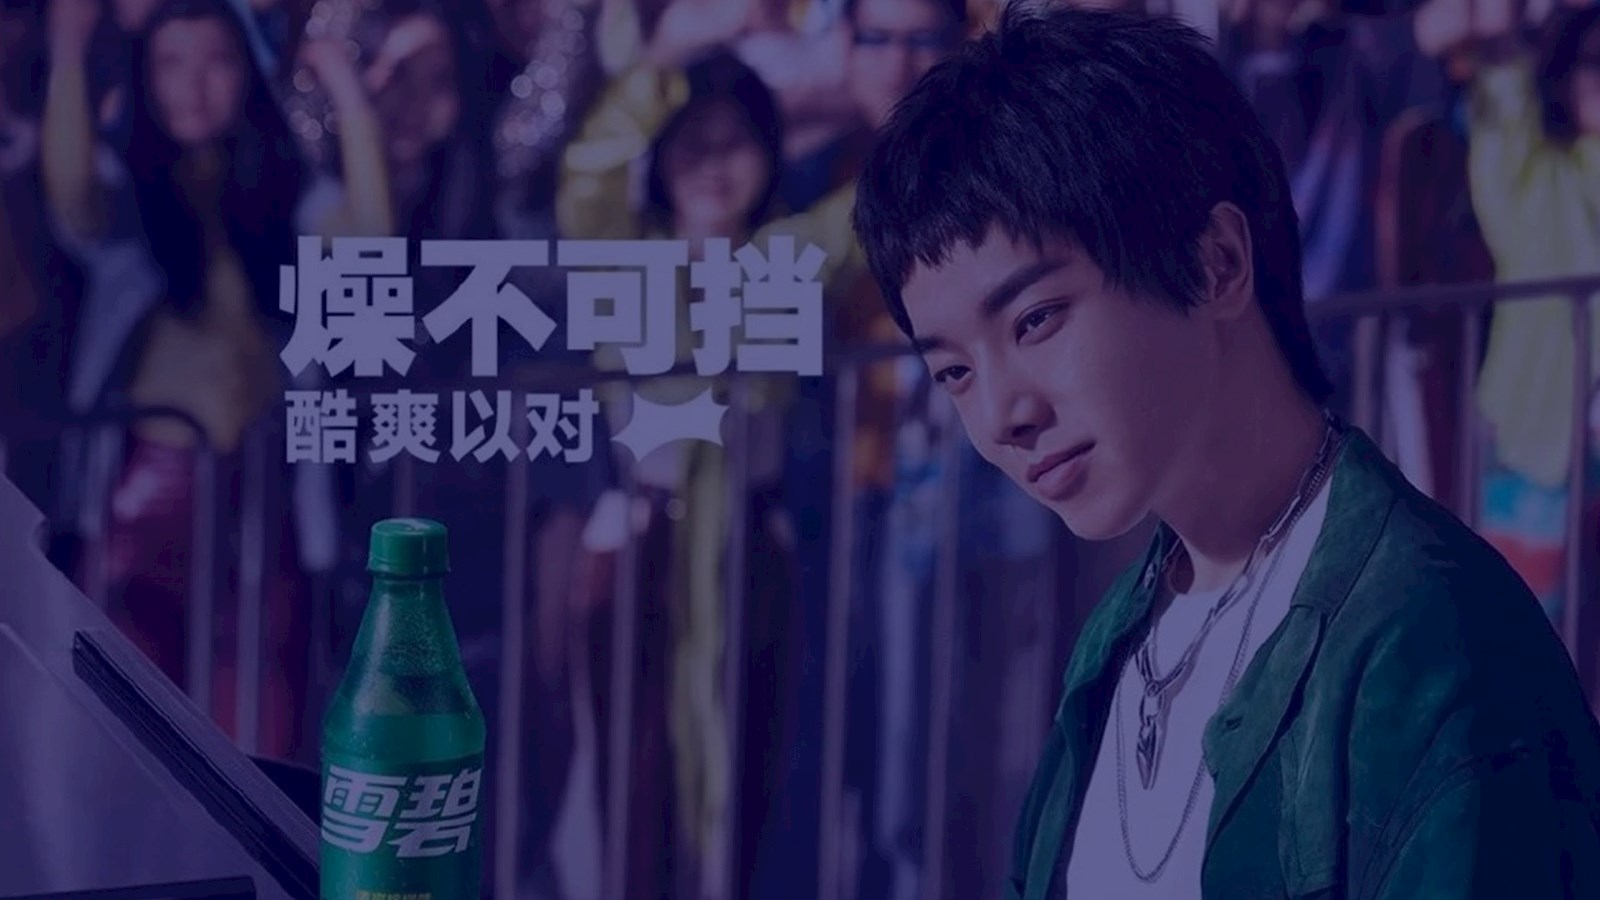 Chinese pop star playing in front of crowd looking at a Sprite bottle